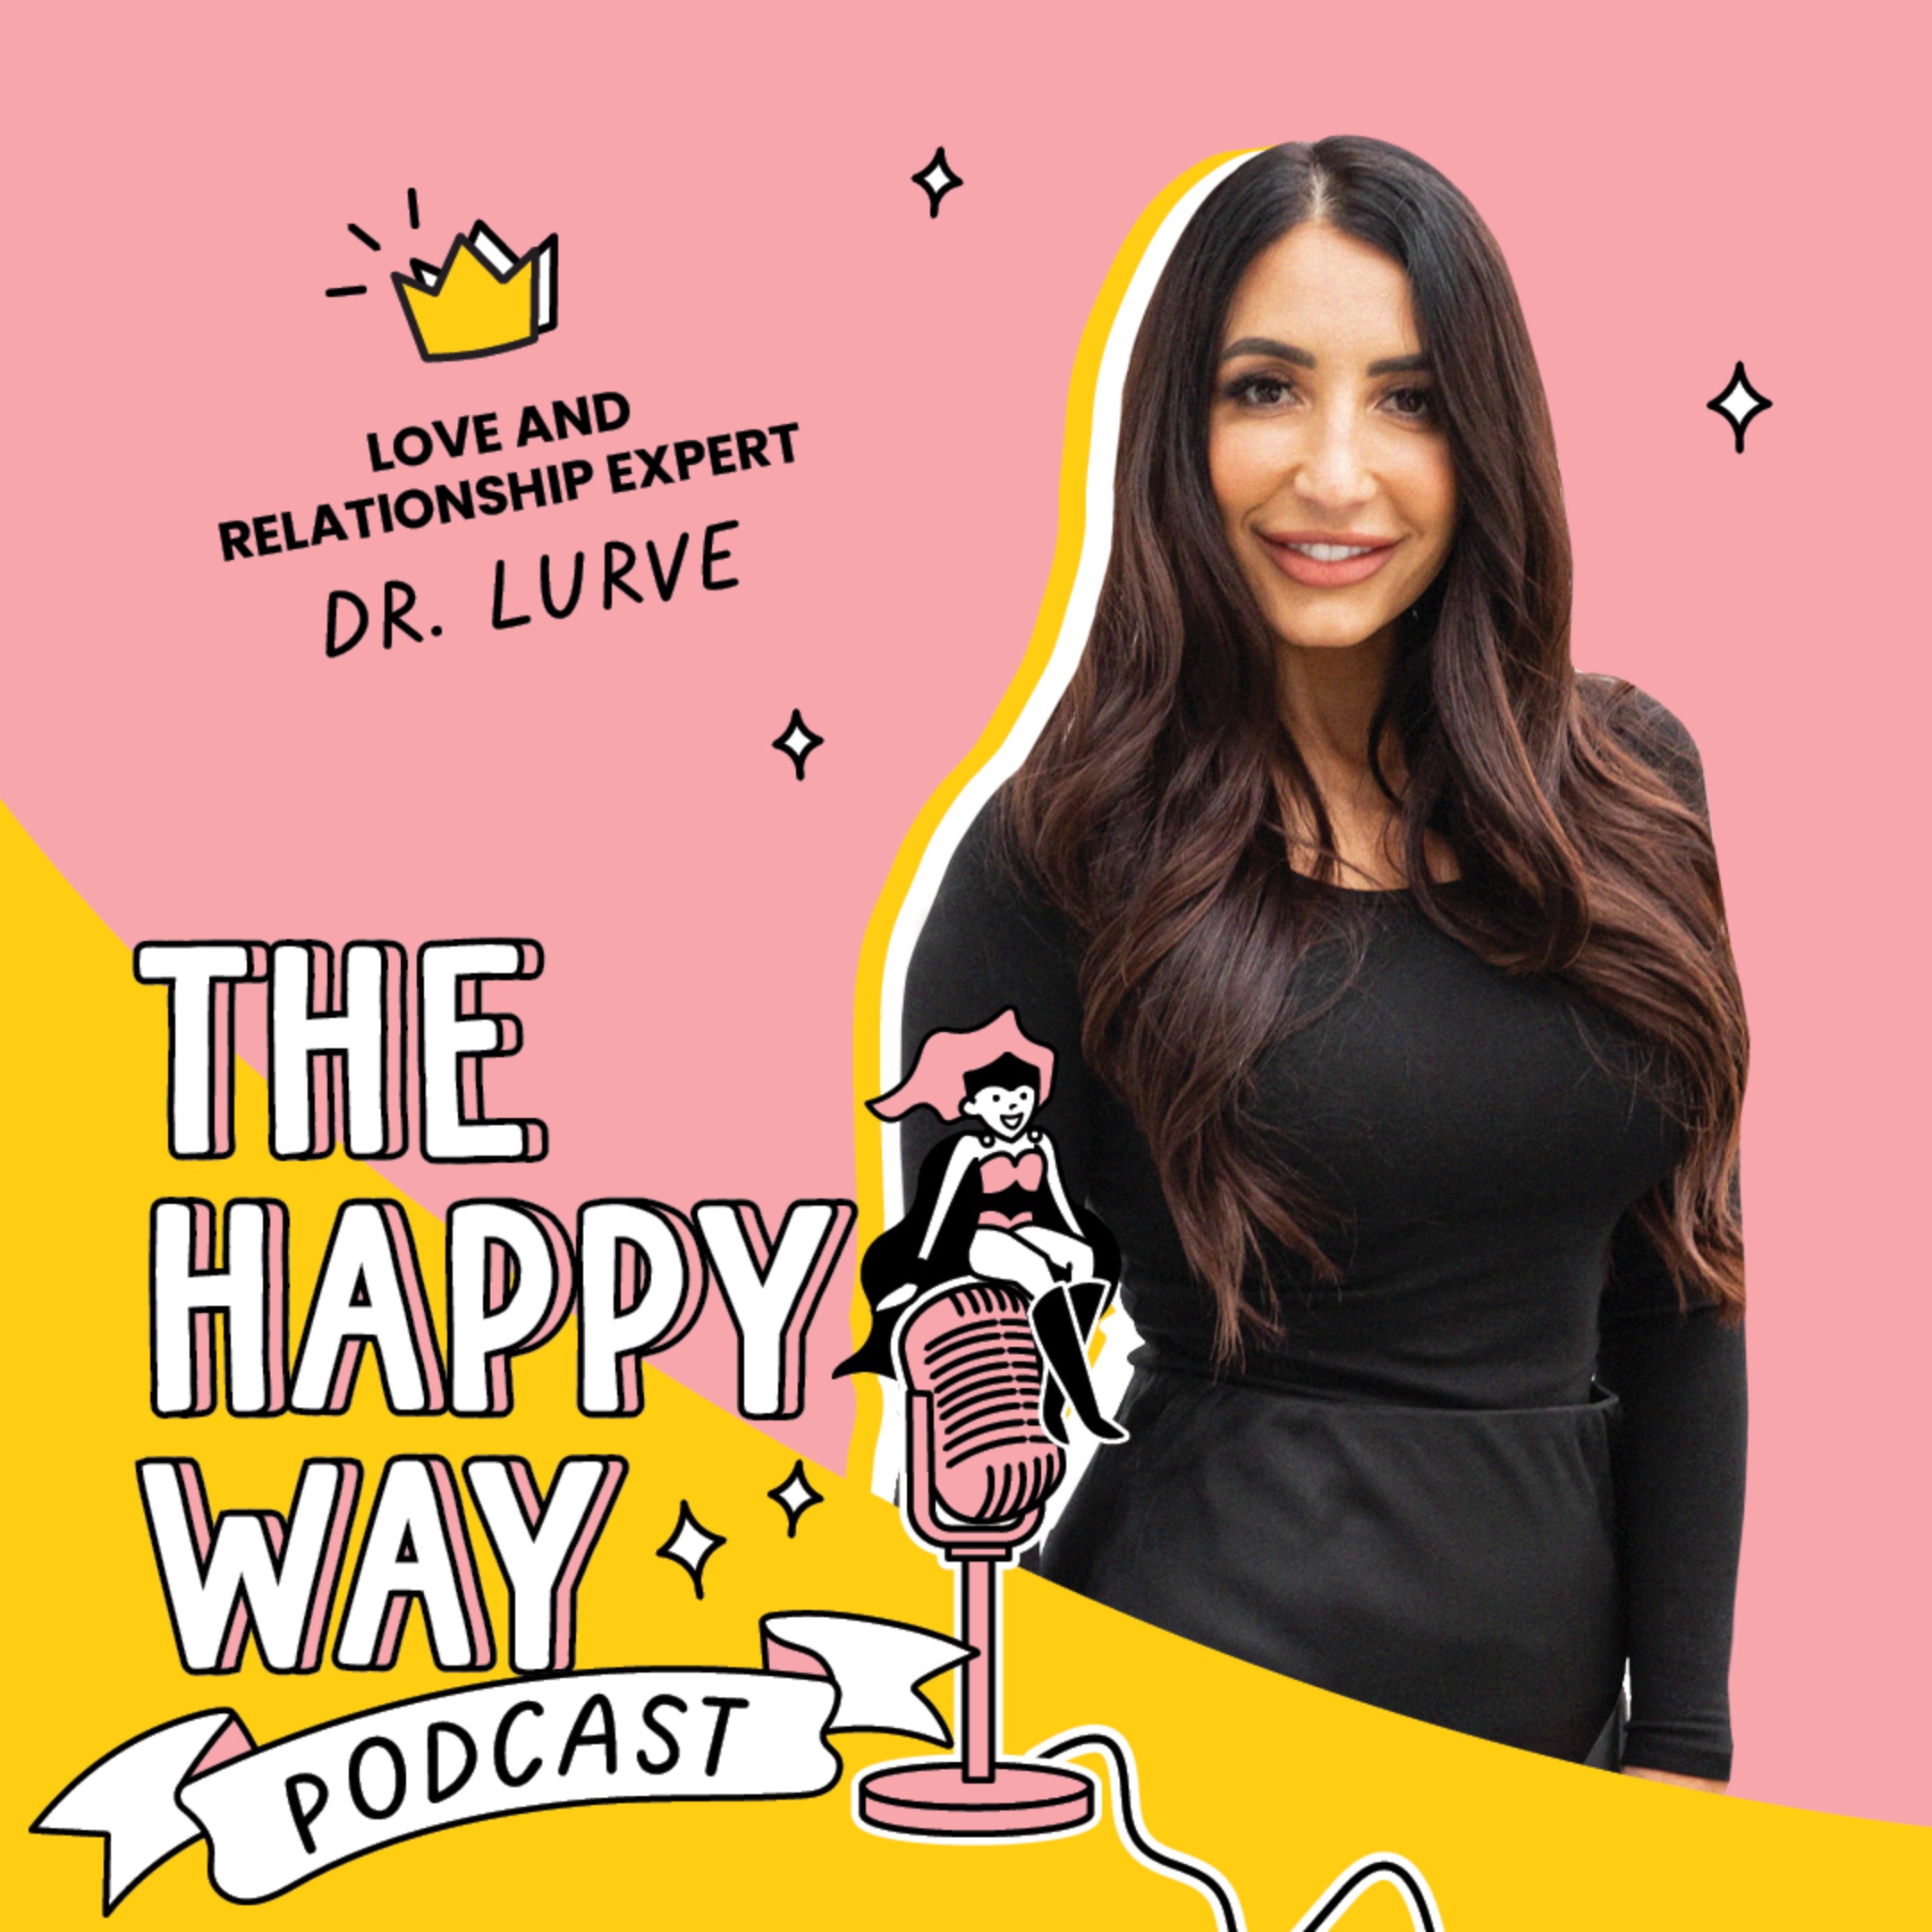 Dr Lurve – From healing a broken heart to finding love and making it last—conversations with a love and relationship expert